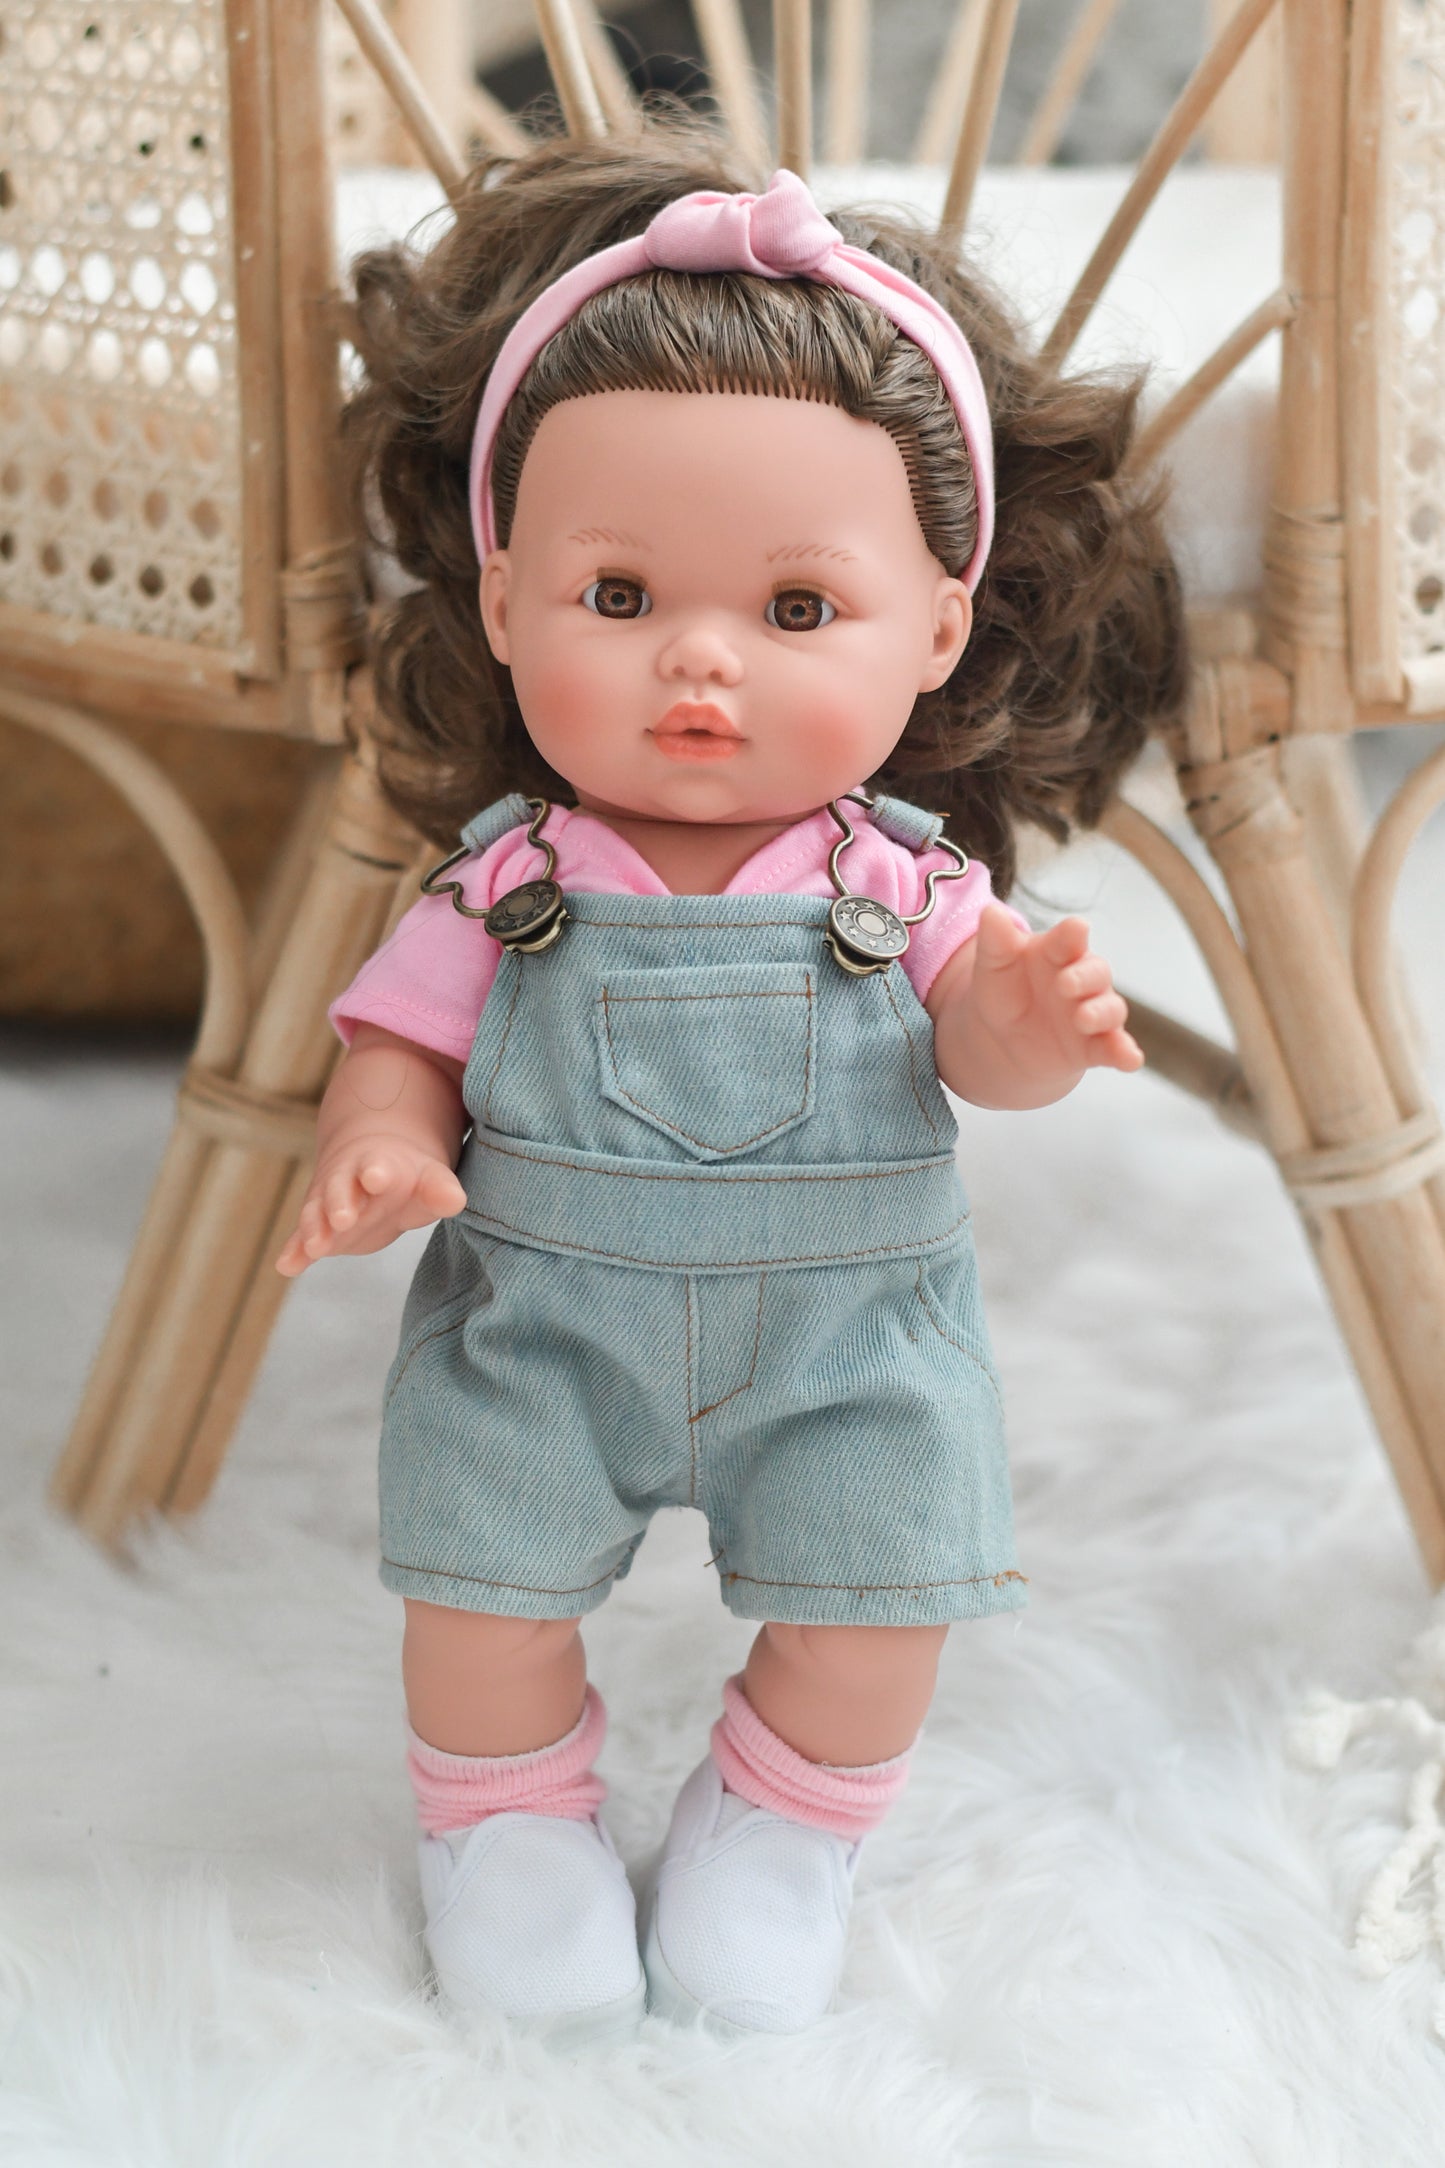 Alaska With Ms. Rachel Inspired Outfit- Mini Colettos Girl Doll - OOAK